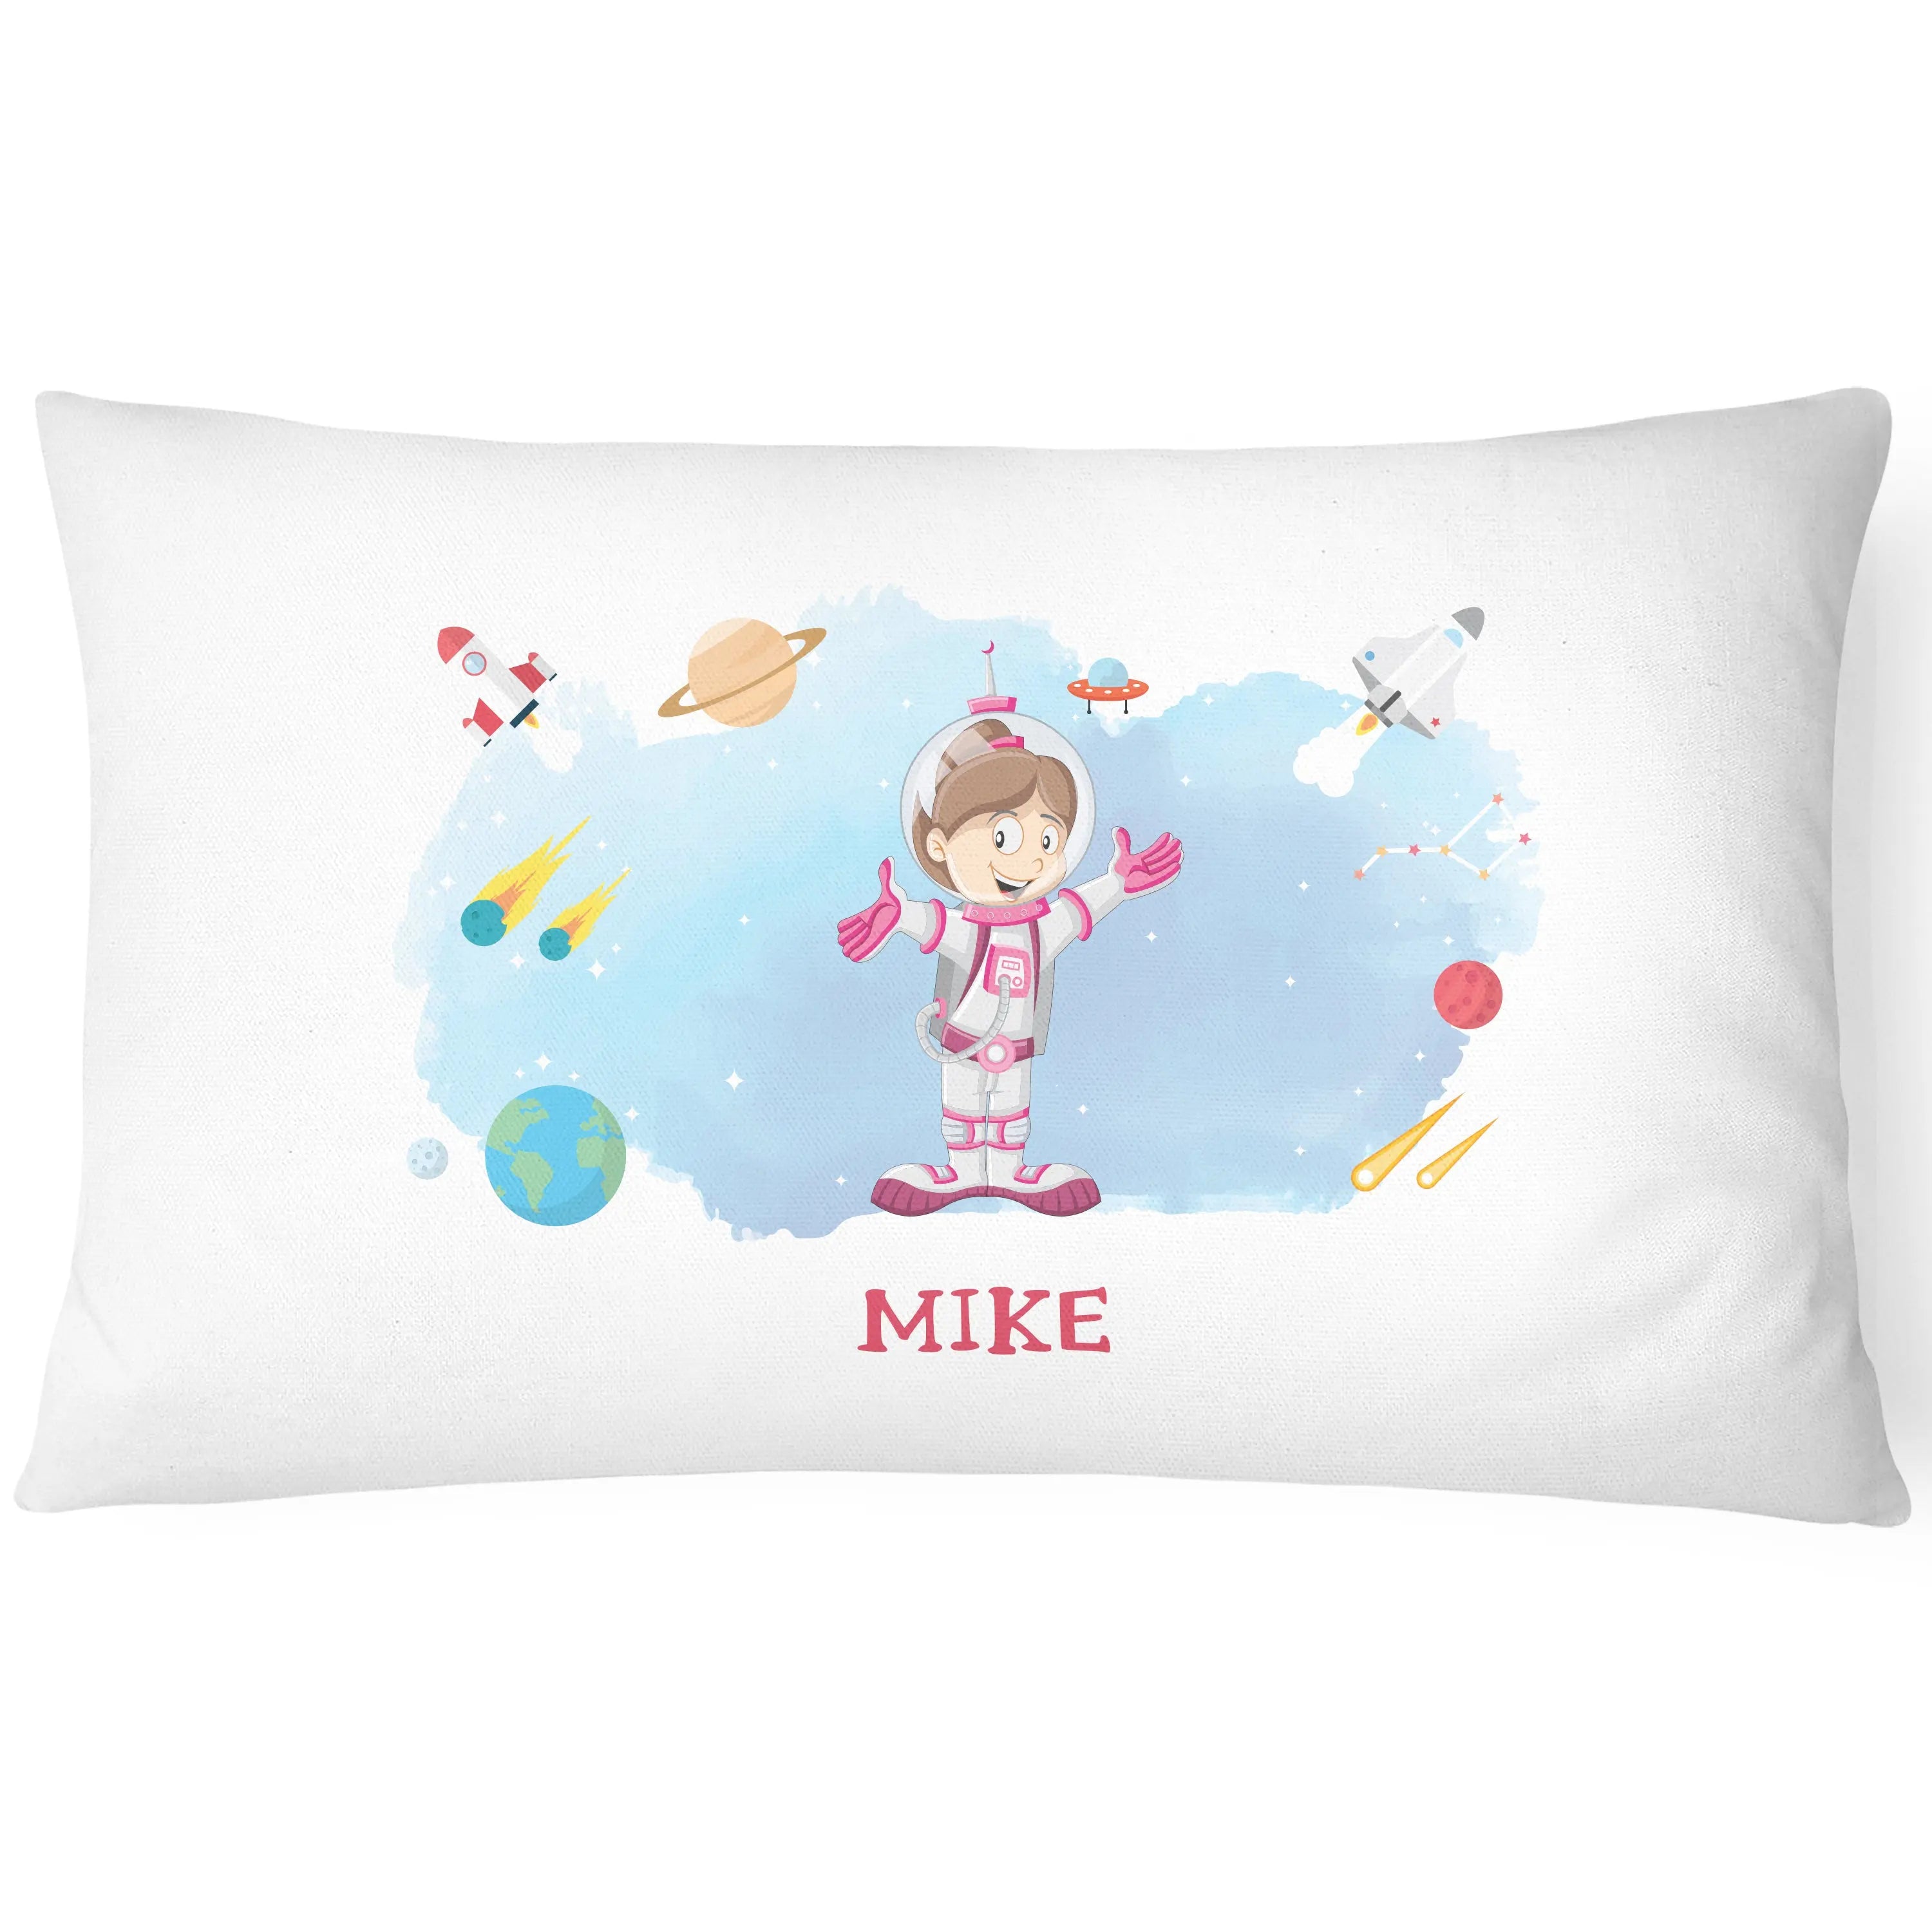 Space Pillowcase for Kids - Personalise With Any Name - It's Here! - CushionPop